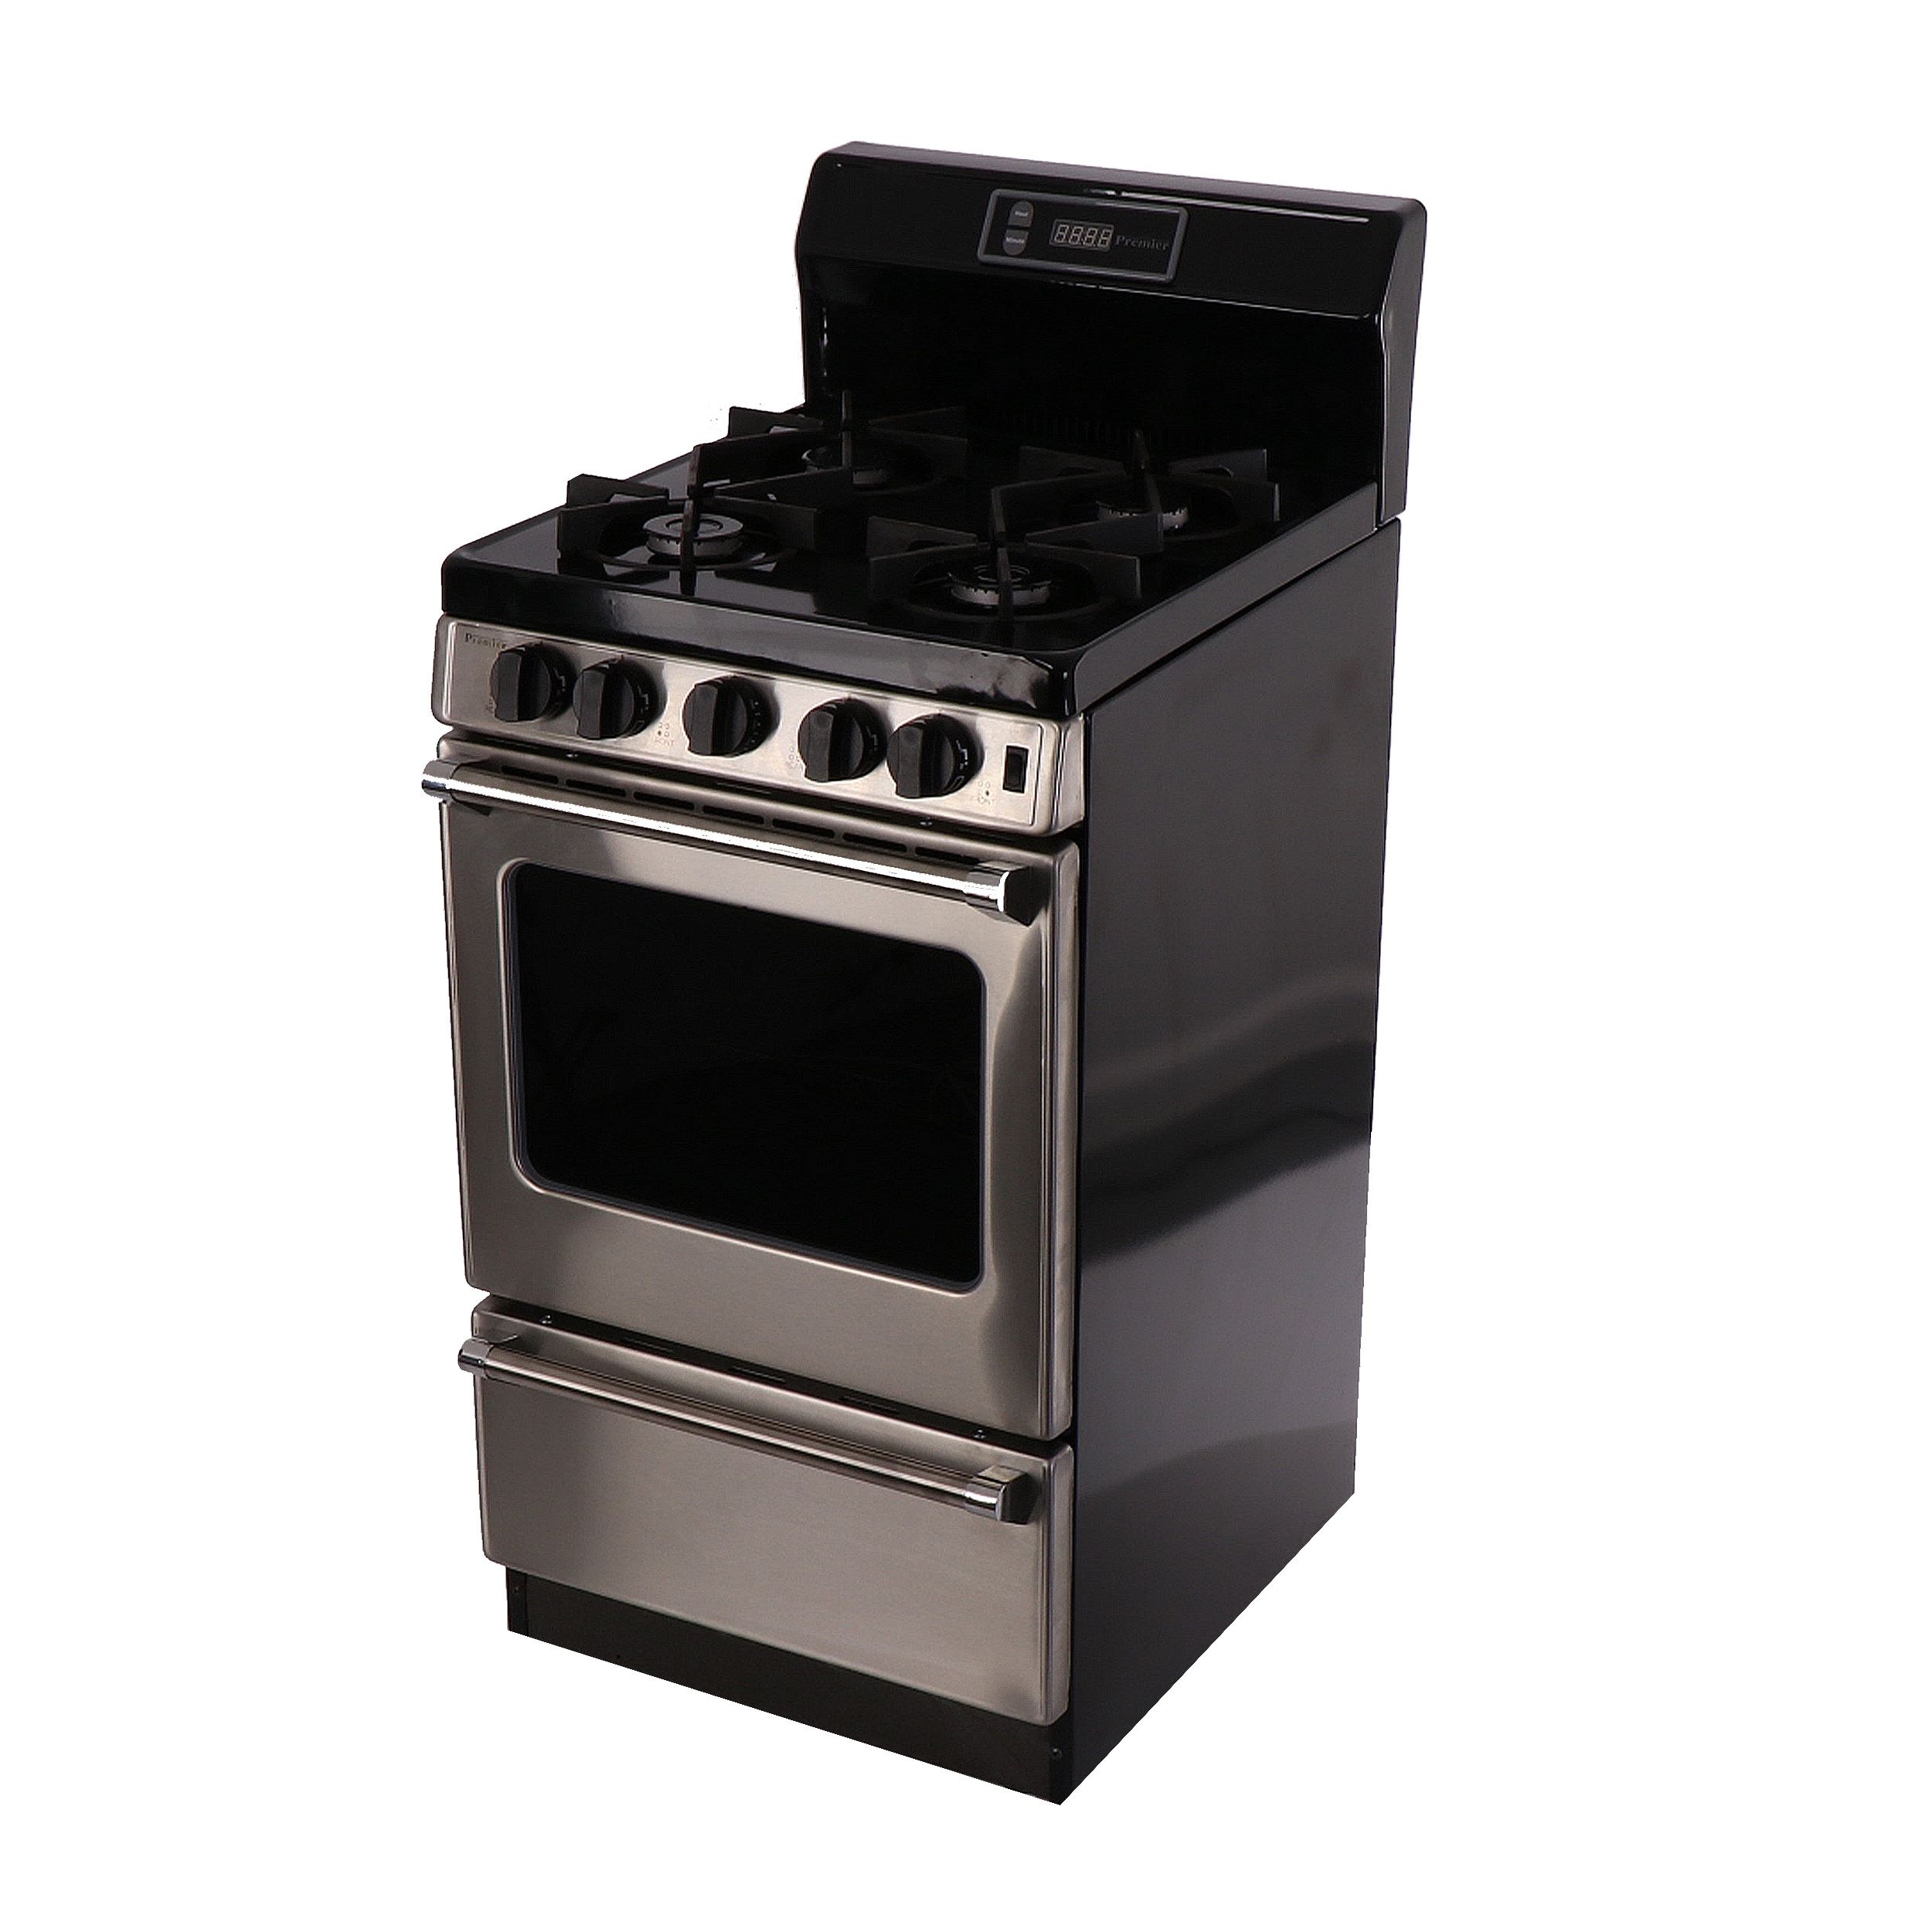 Holiday 20-in 4 Burners 2.4-cu ft Freestanding Natural Gas Range